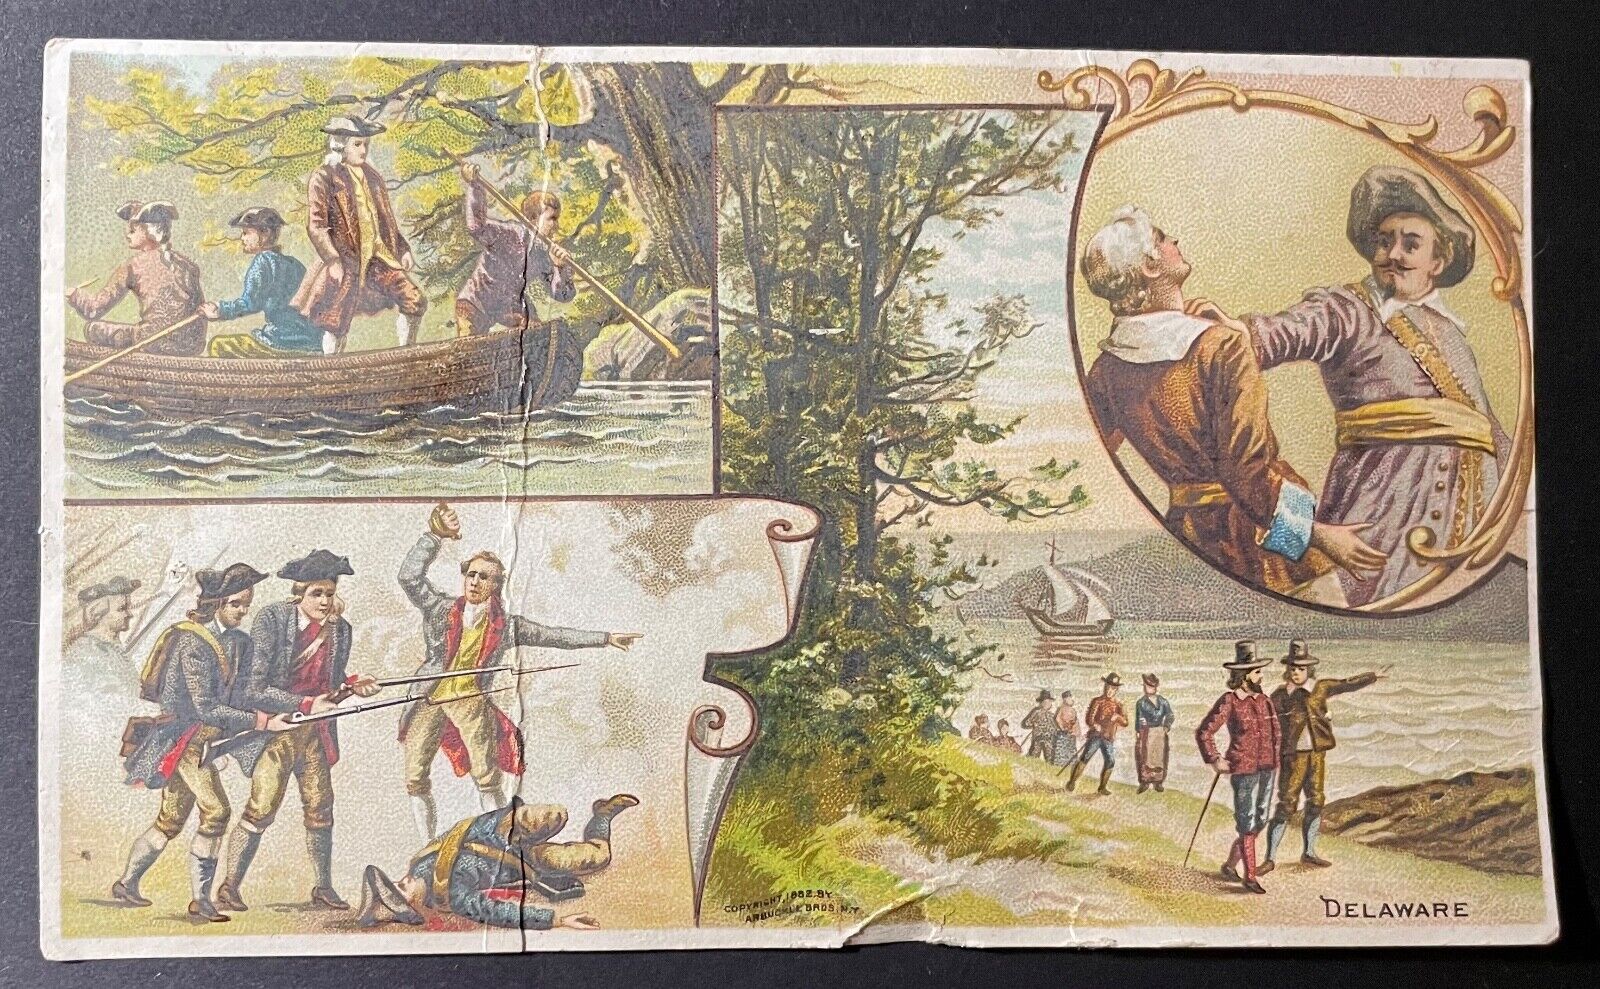 Arbuckle Brothers Coffee - Delaware Trade Card Antique Vintage 1890s - Rough Co.